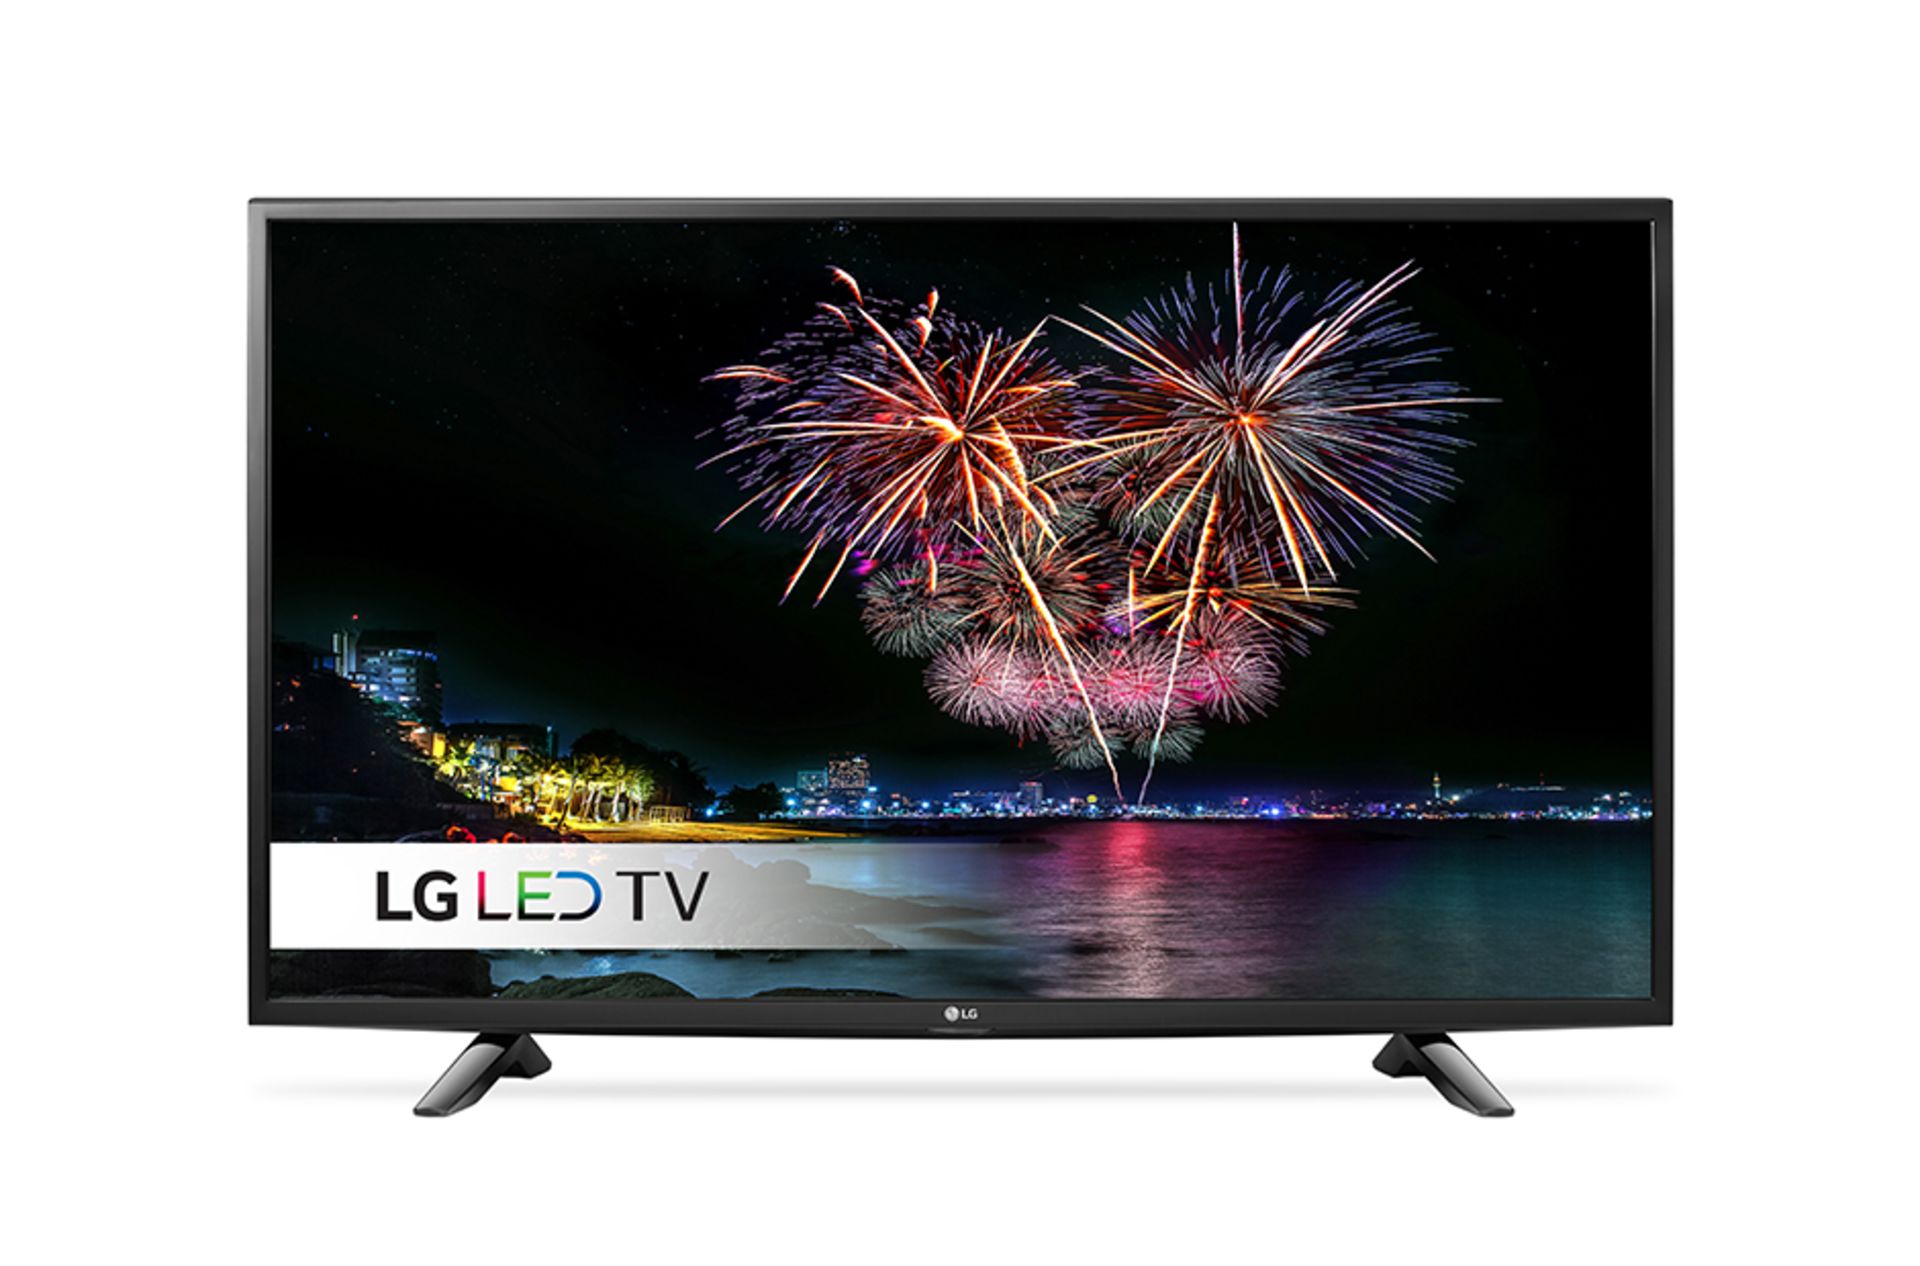 V Grade A LG 43" Full HD LED TV With Freeview - HDMI - Scart - USB - Energy Rating A++